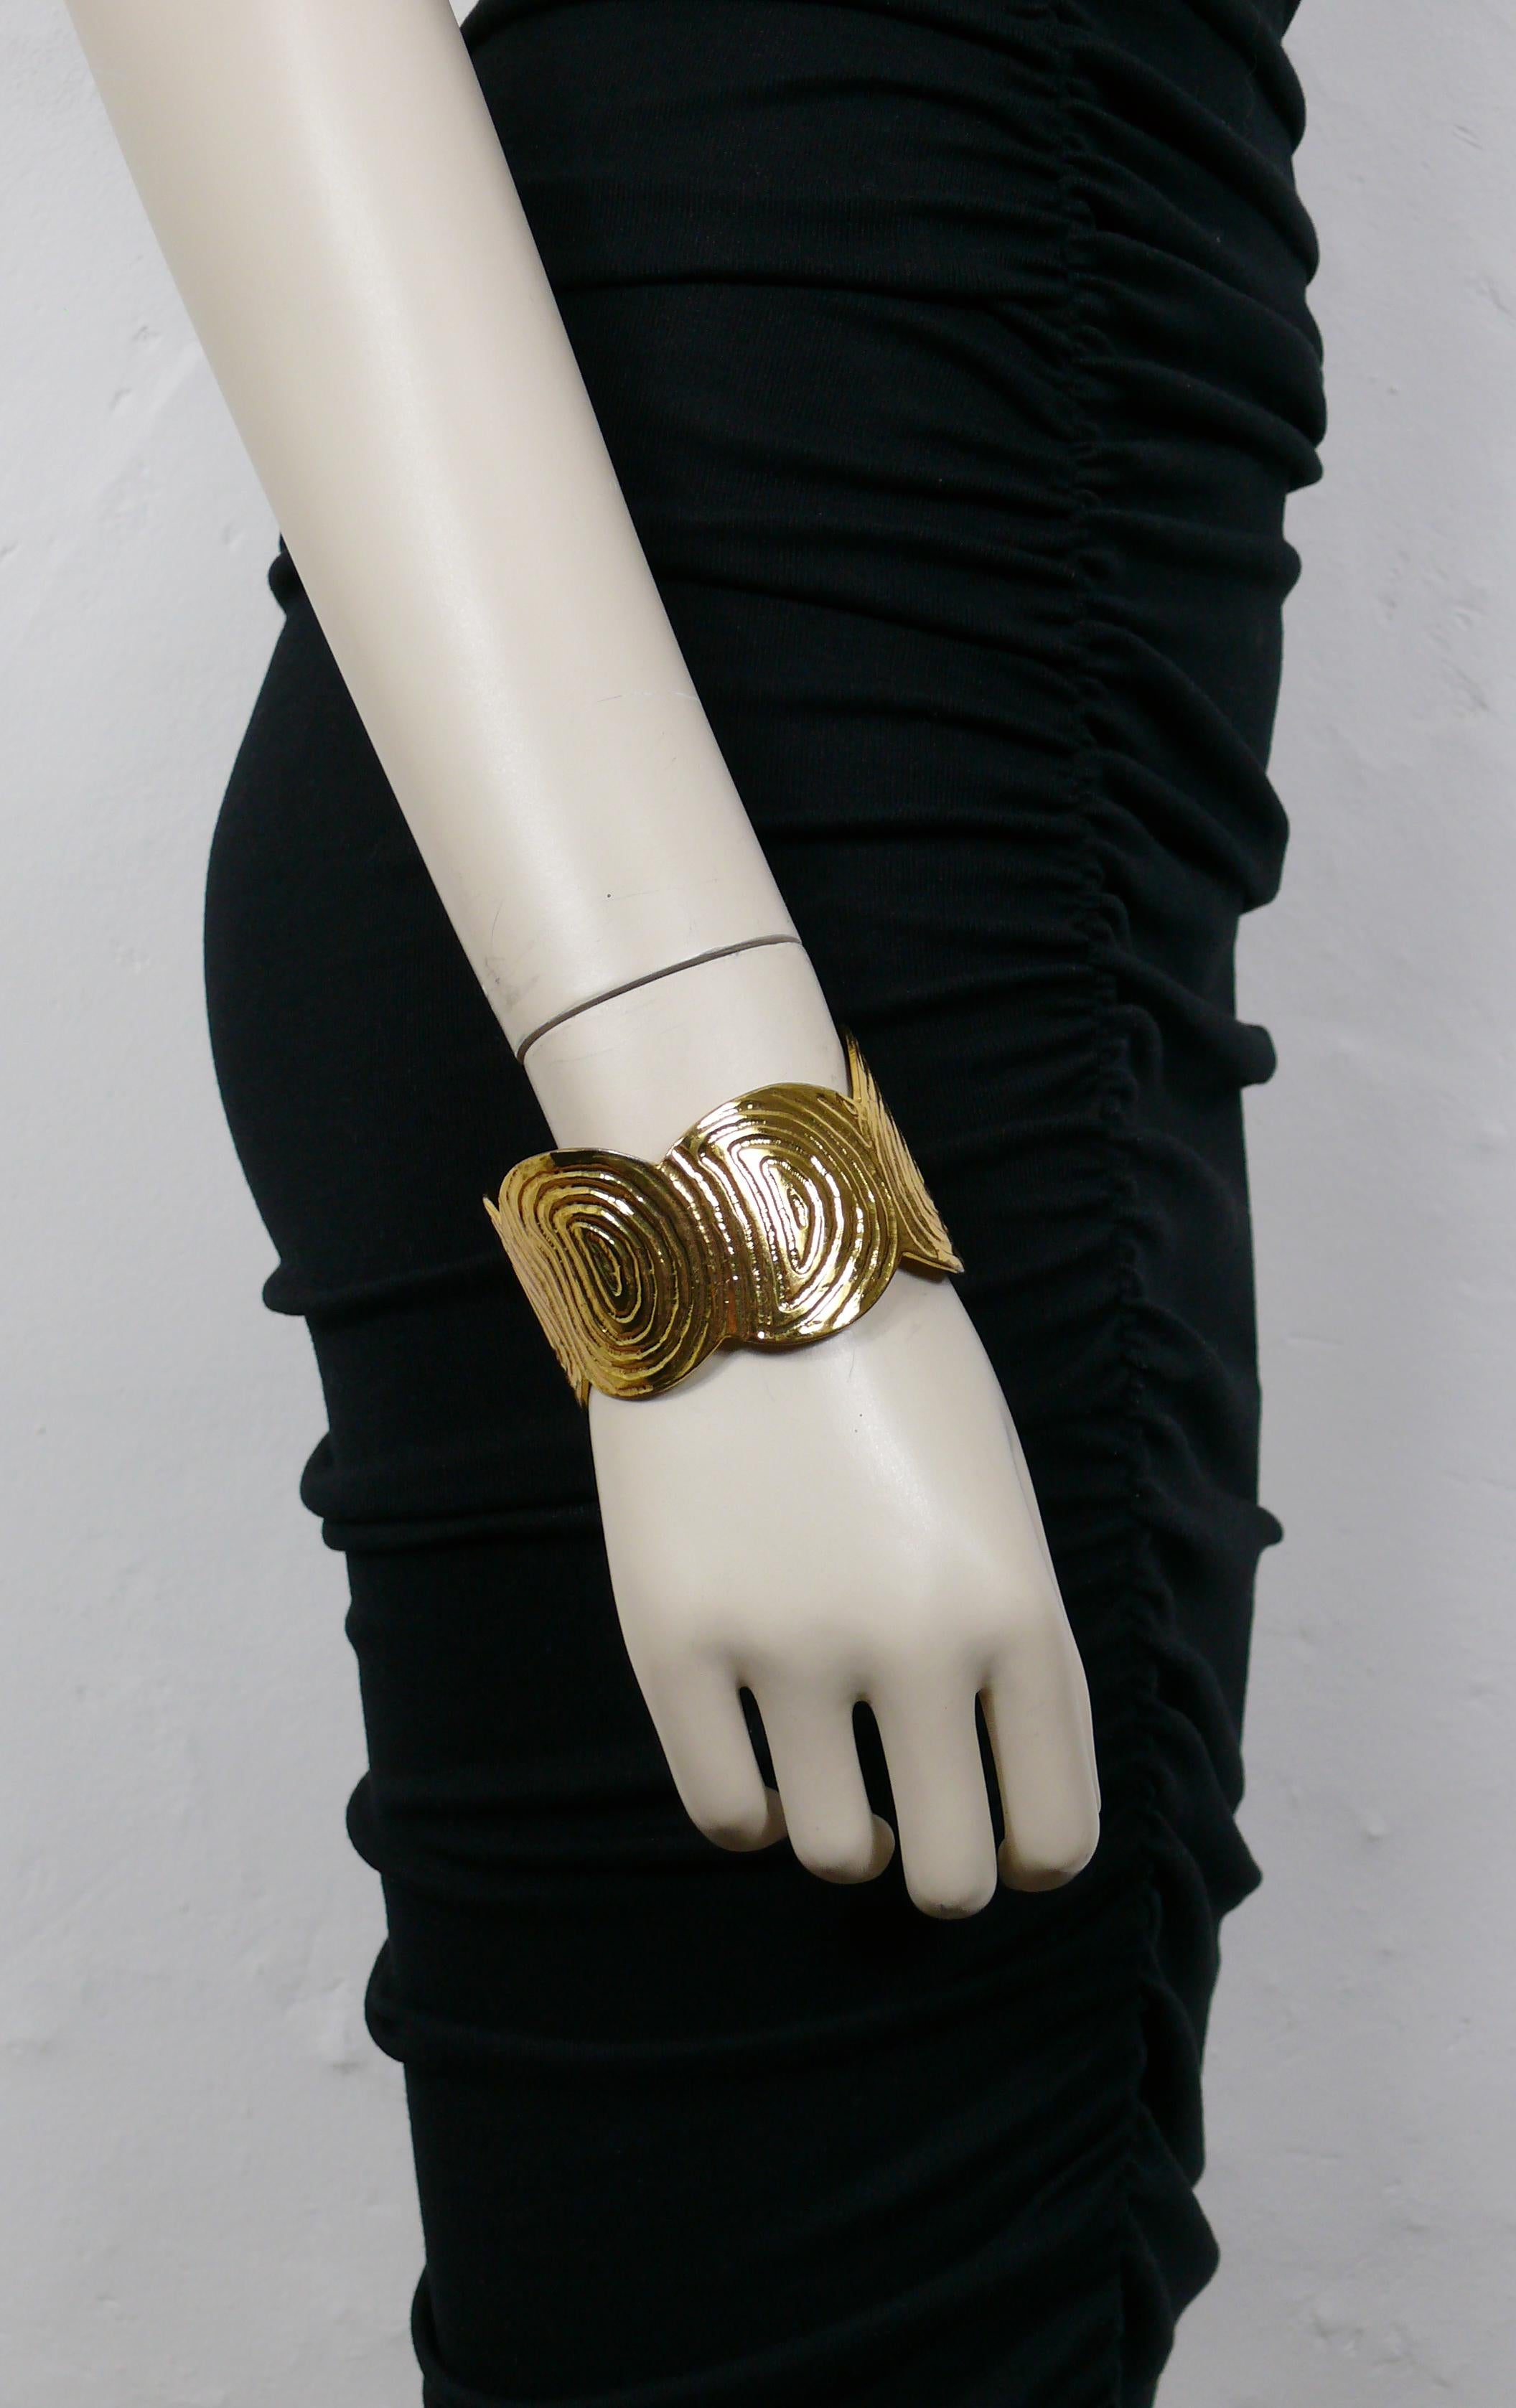 YVES SAINT LAURENT RIVE GAUCHE vintage gold toned cuff bracelet featuring a fingerprint design.

Embossed YVES SAINT LAURENT RIVE GAUCHE Made in France.

Indicative measurements : inner circumference approx. 20.42 cm (8.04 inches) / max. width